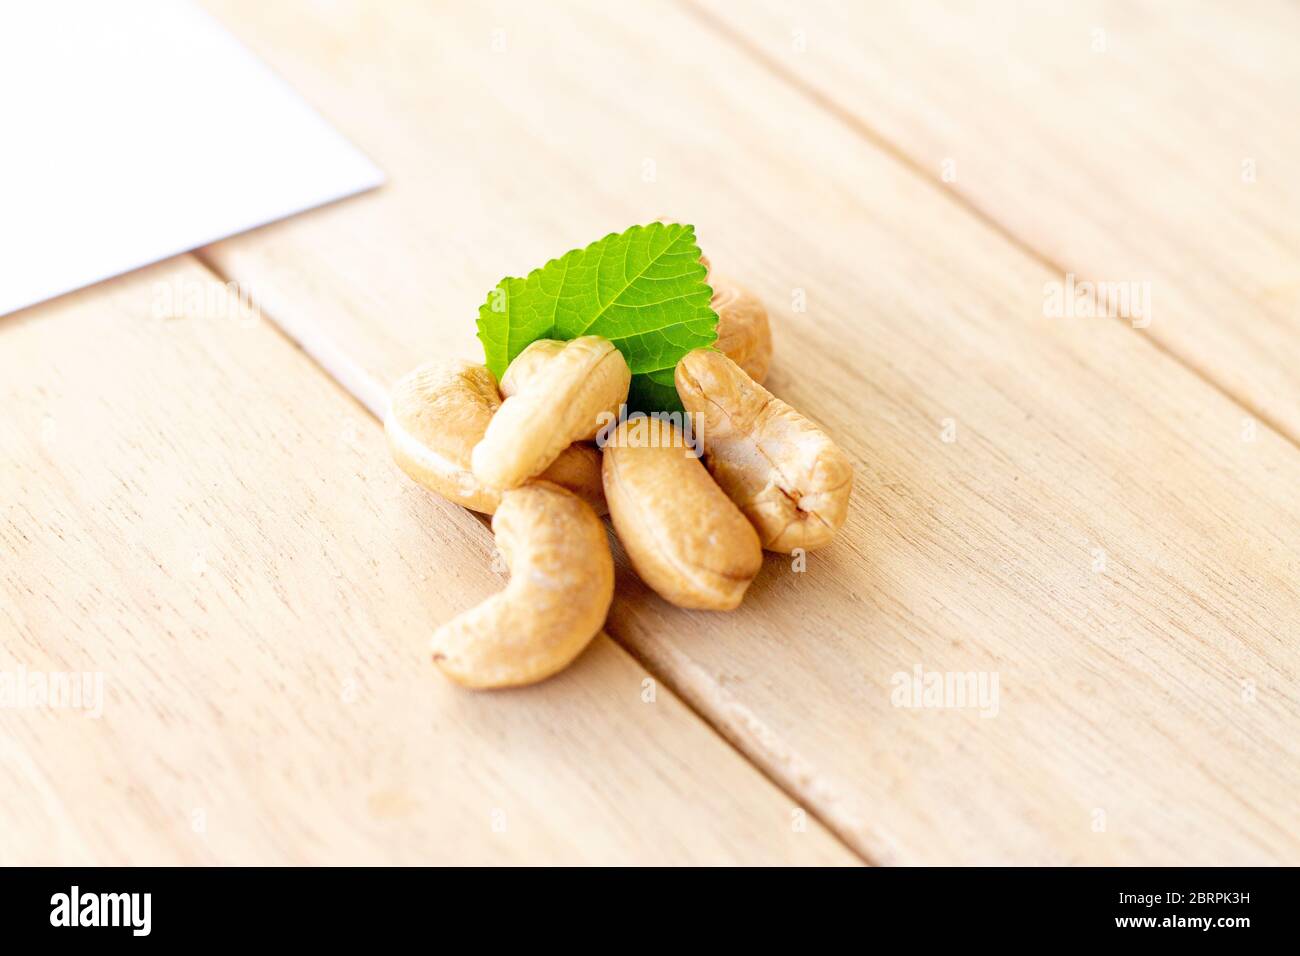 many cashew nut with green leaf on wooden table in studio Stock Photo